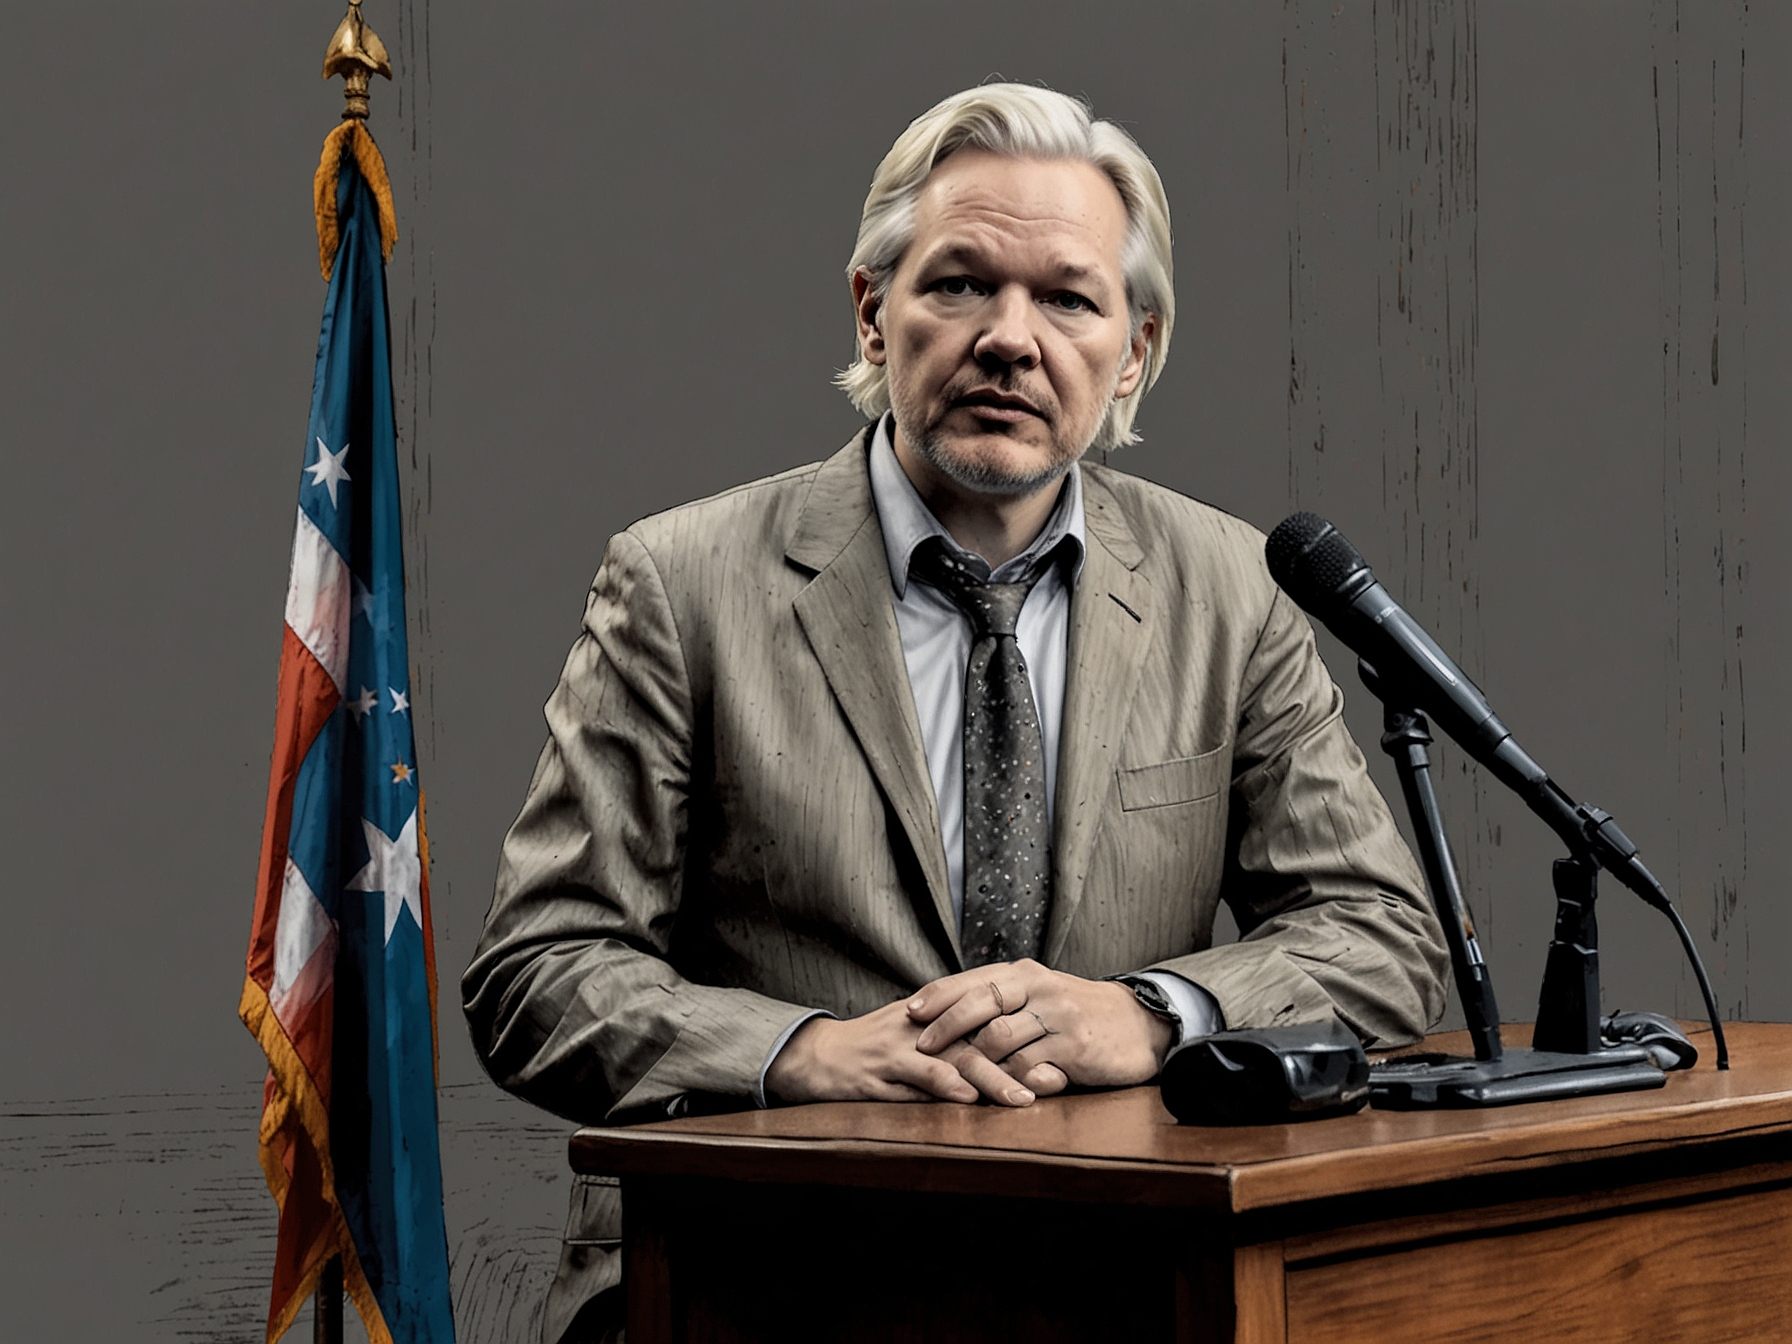 A gravely looking Julian Assange addresses the media, symbolizing his contentious role in advocating for transparency against accusations of jeopardizing national security.